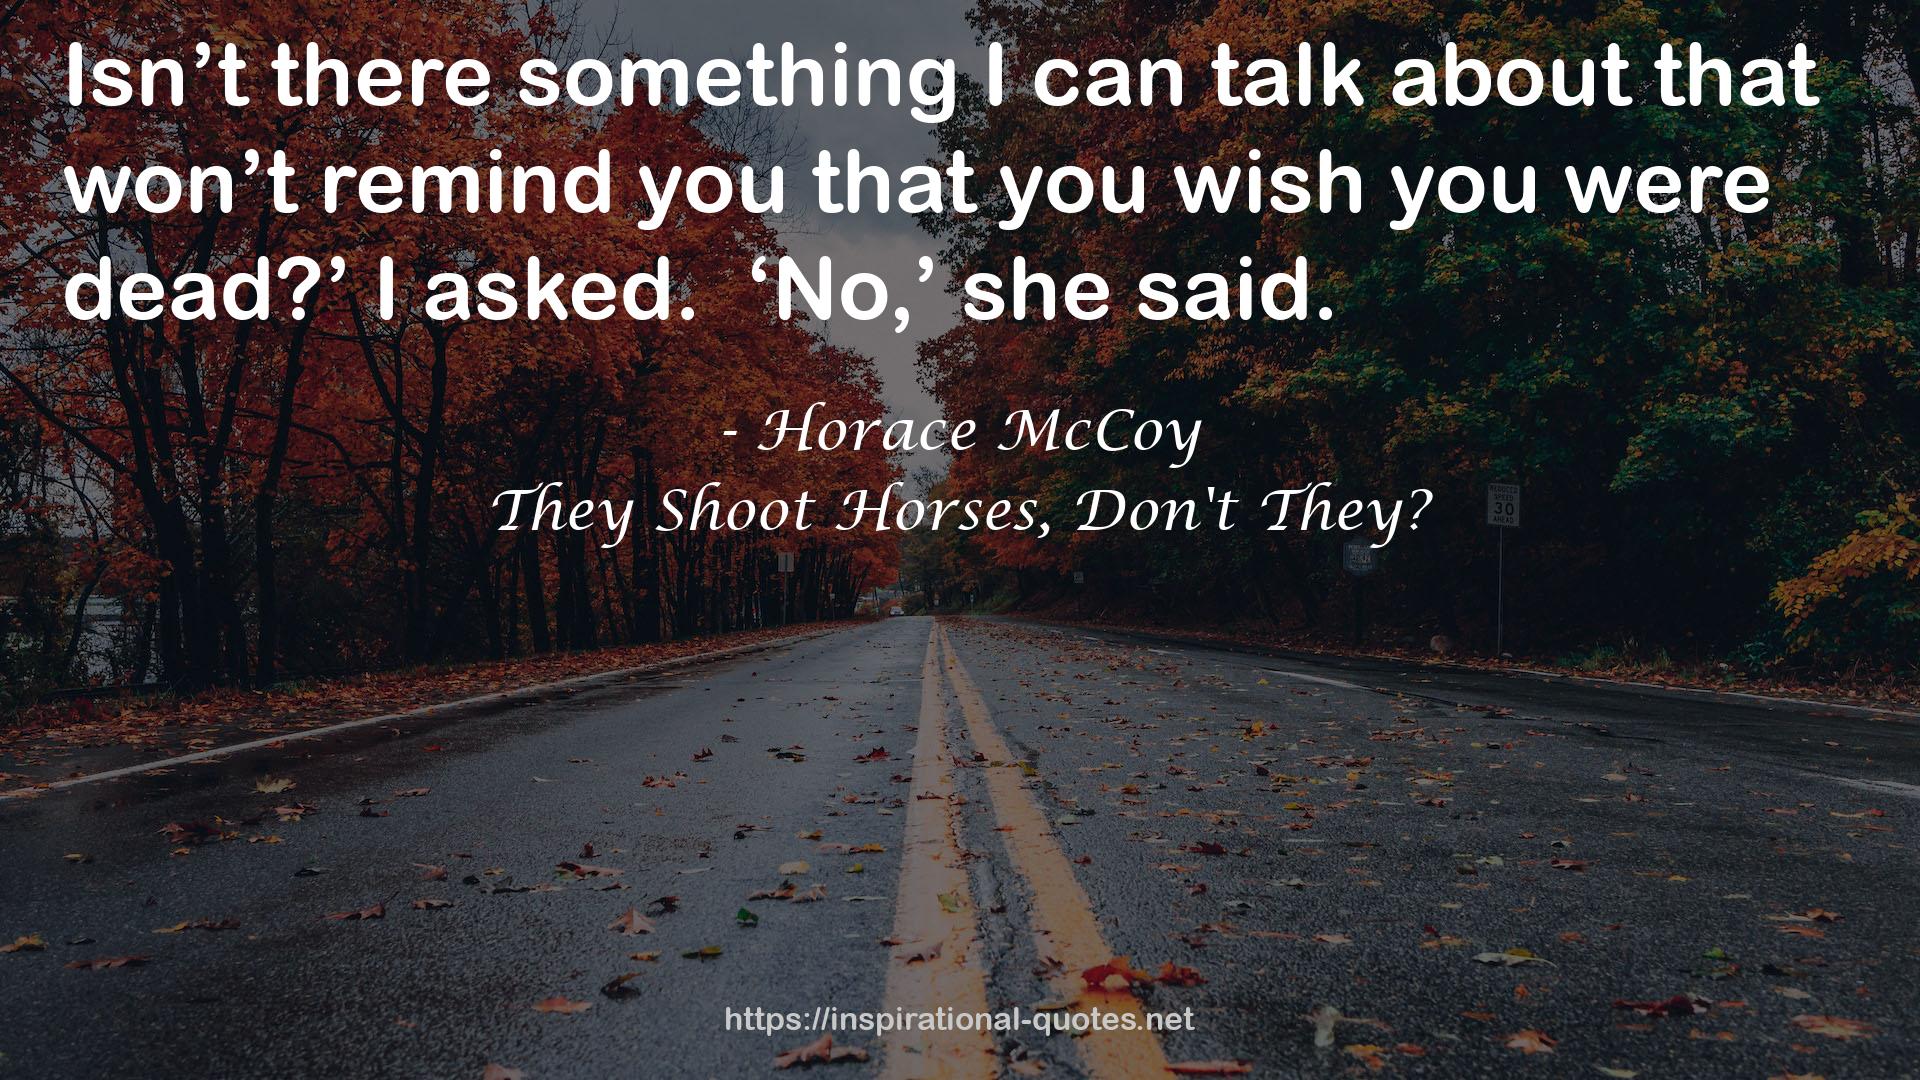 They Shoot Horses, Don't They? QUOTES